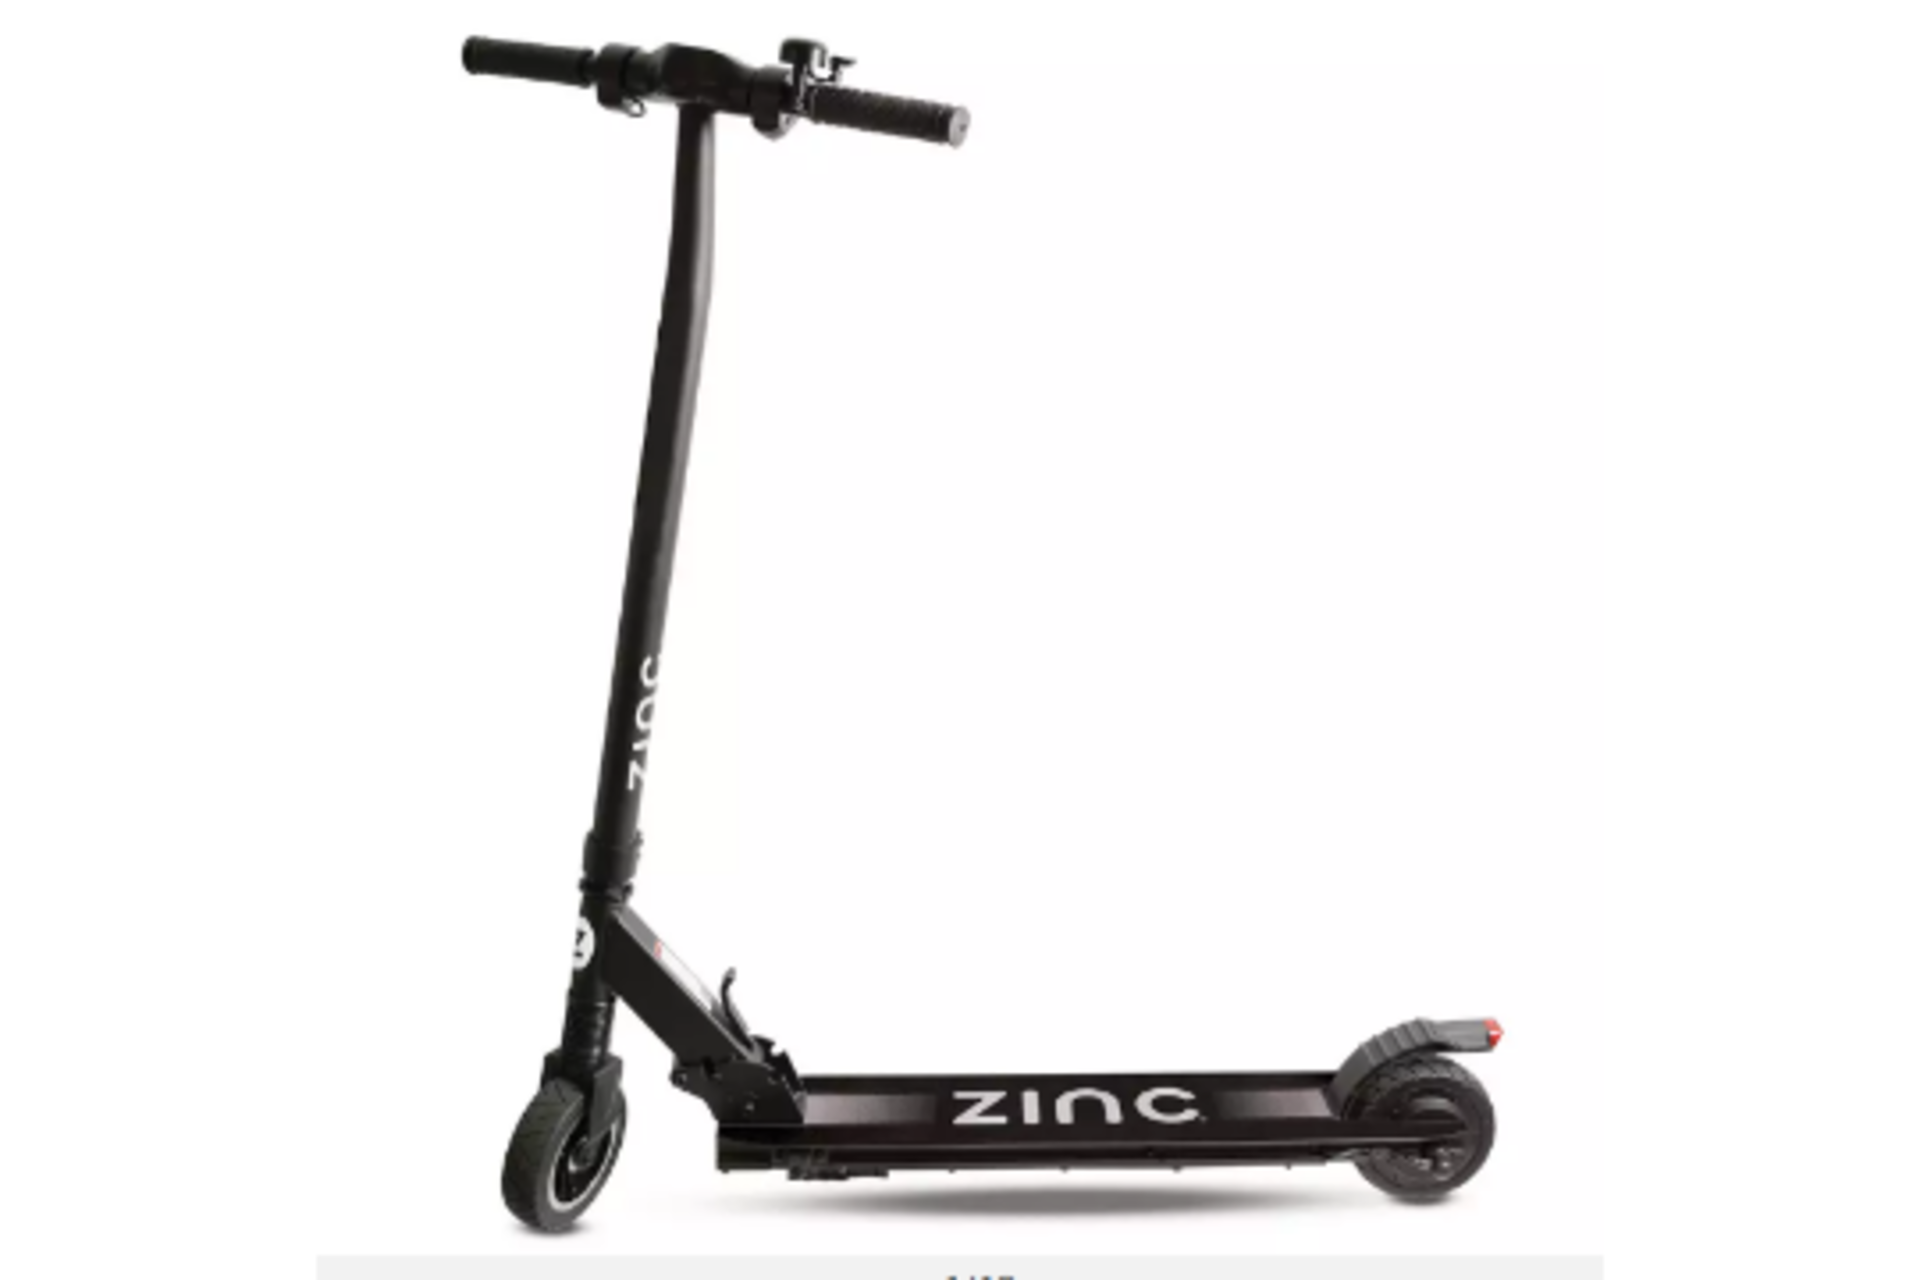 Zinc Eco 6 Inch Solid Rubber Electric Scooter. RRP £350.00. - BW. The Zinc folding electric Eco is a